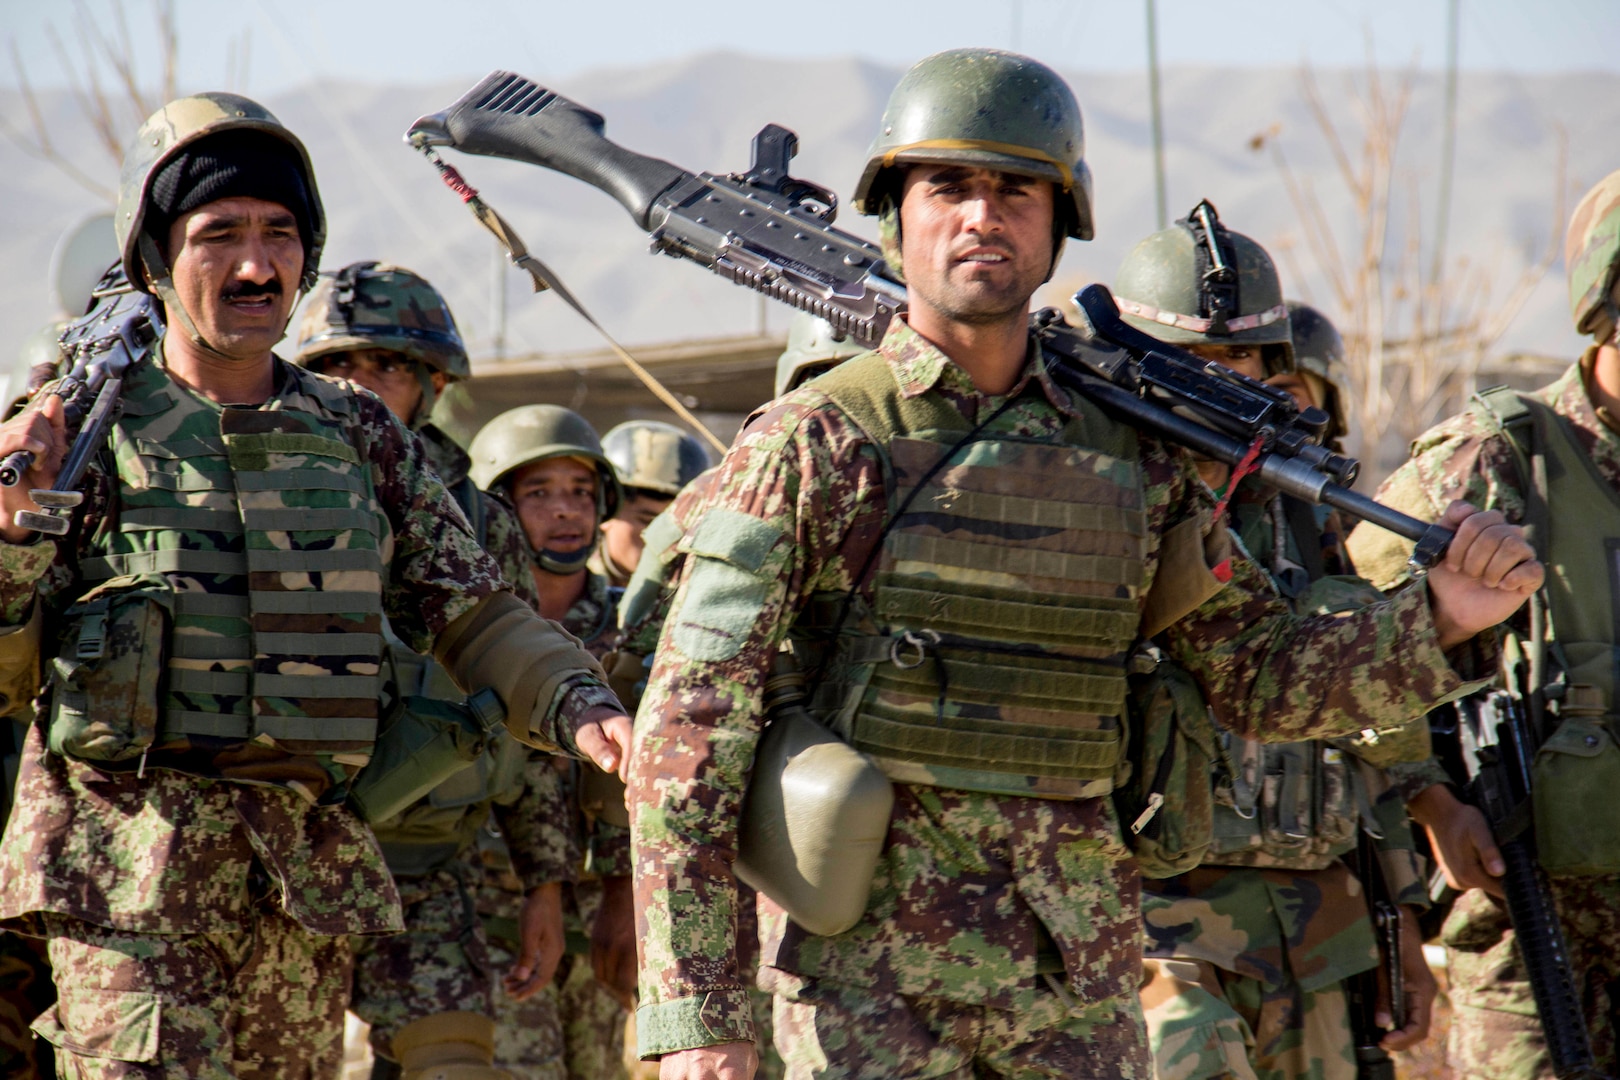 Soldiers assigned to the 201st  Afghan National Army Corps return from conducting collective training near Camp Torah in Sarobi district, Afghanistan, Dec. 27, 2016.  The training was conducted as part of the corps winter campaign strategy designed to build capability and capacity within the organization. (U.S. Army photo by Capt. Grace Geiger)